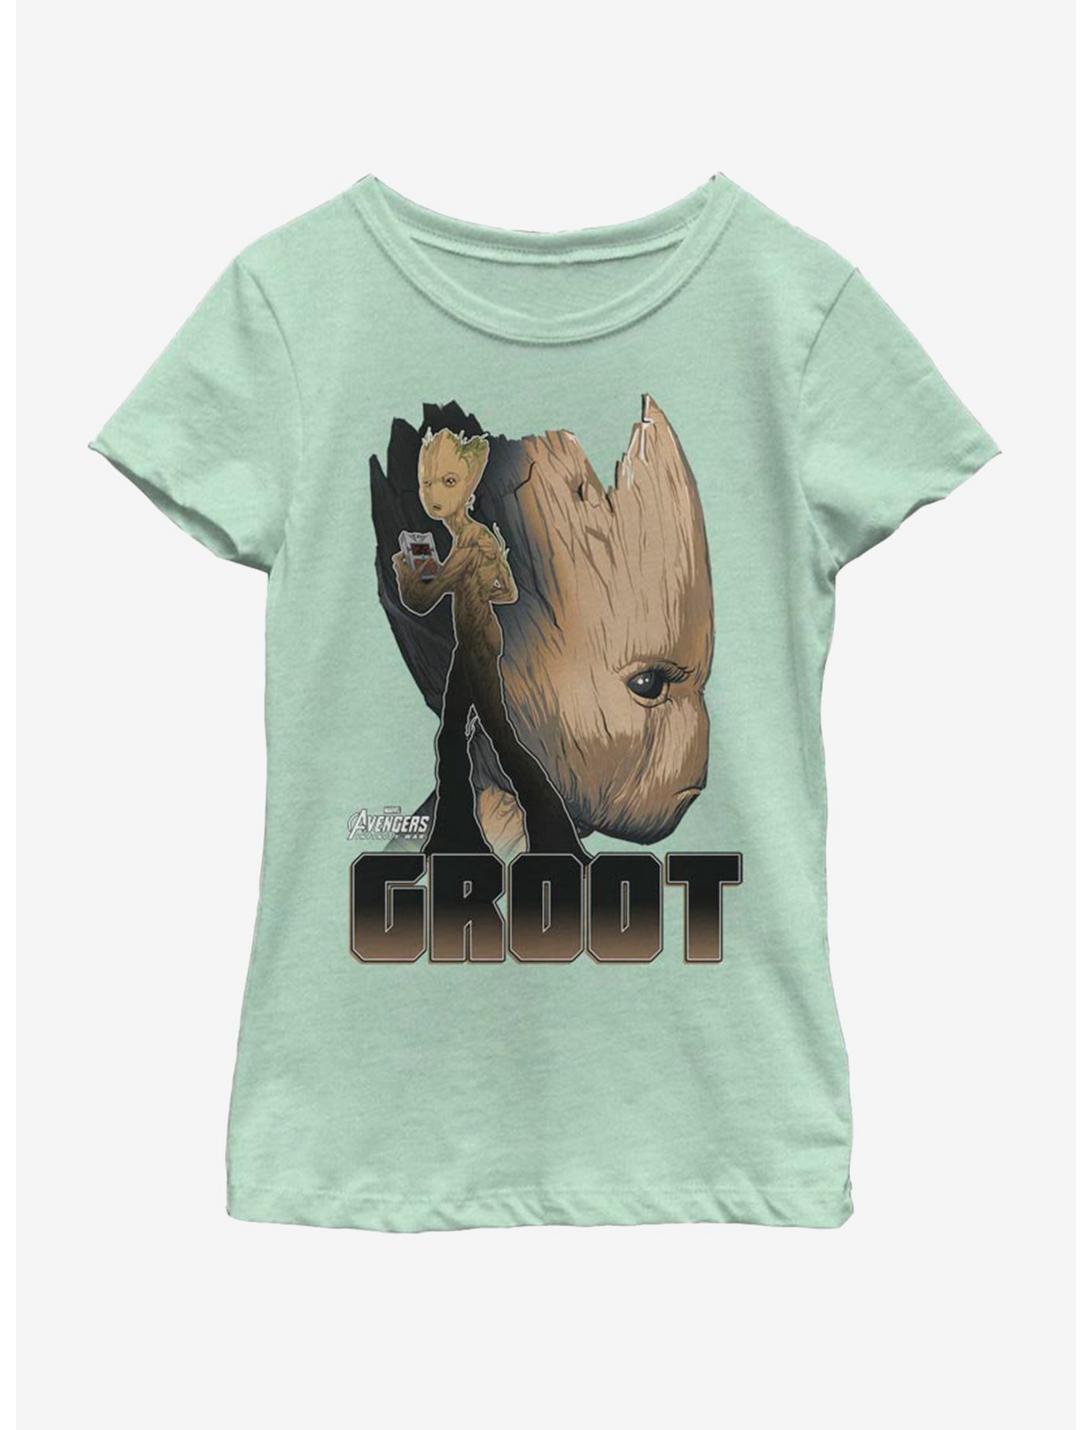 Marvel Guardians of the Galaxy Groot Sil Youth Girls T-Shirt, MINT, hi-res